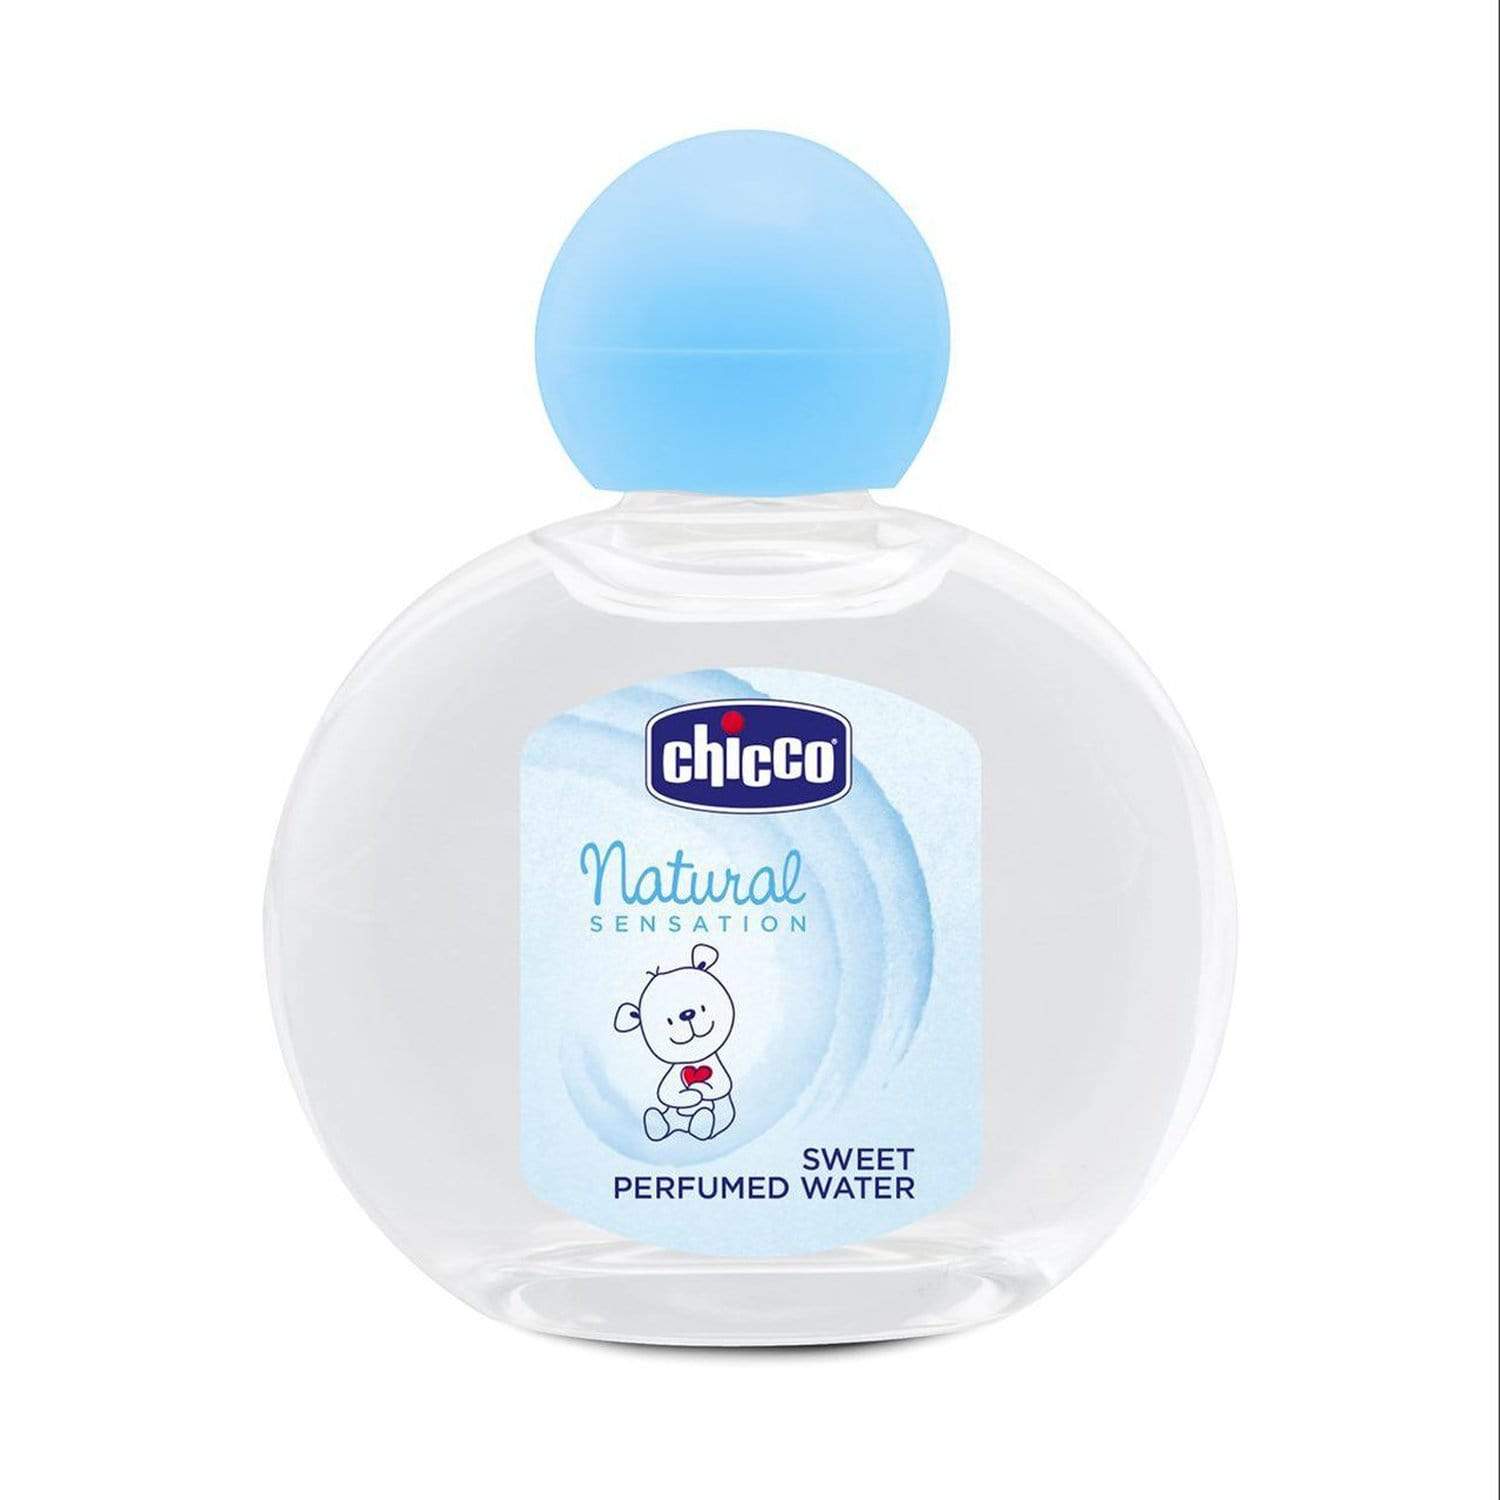 Chicco-Natural-Sensation-Sweet-Perfumed-Water-100ml-CH07928-10